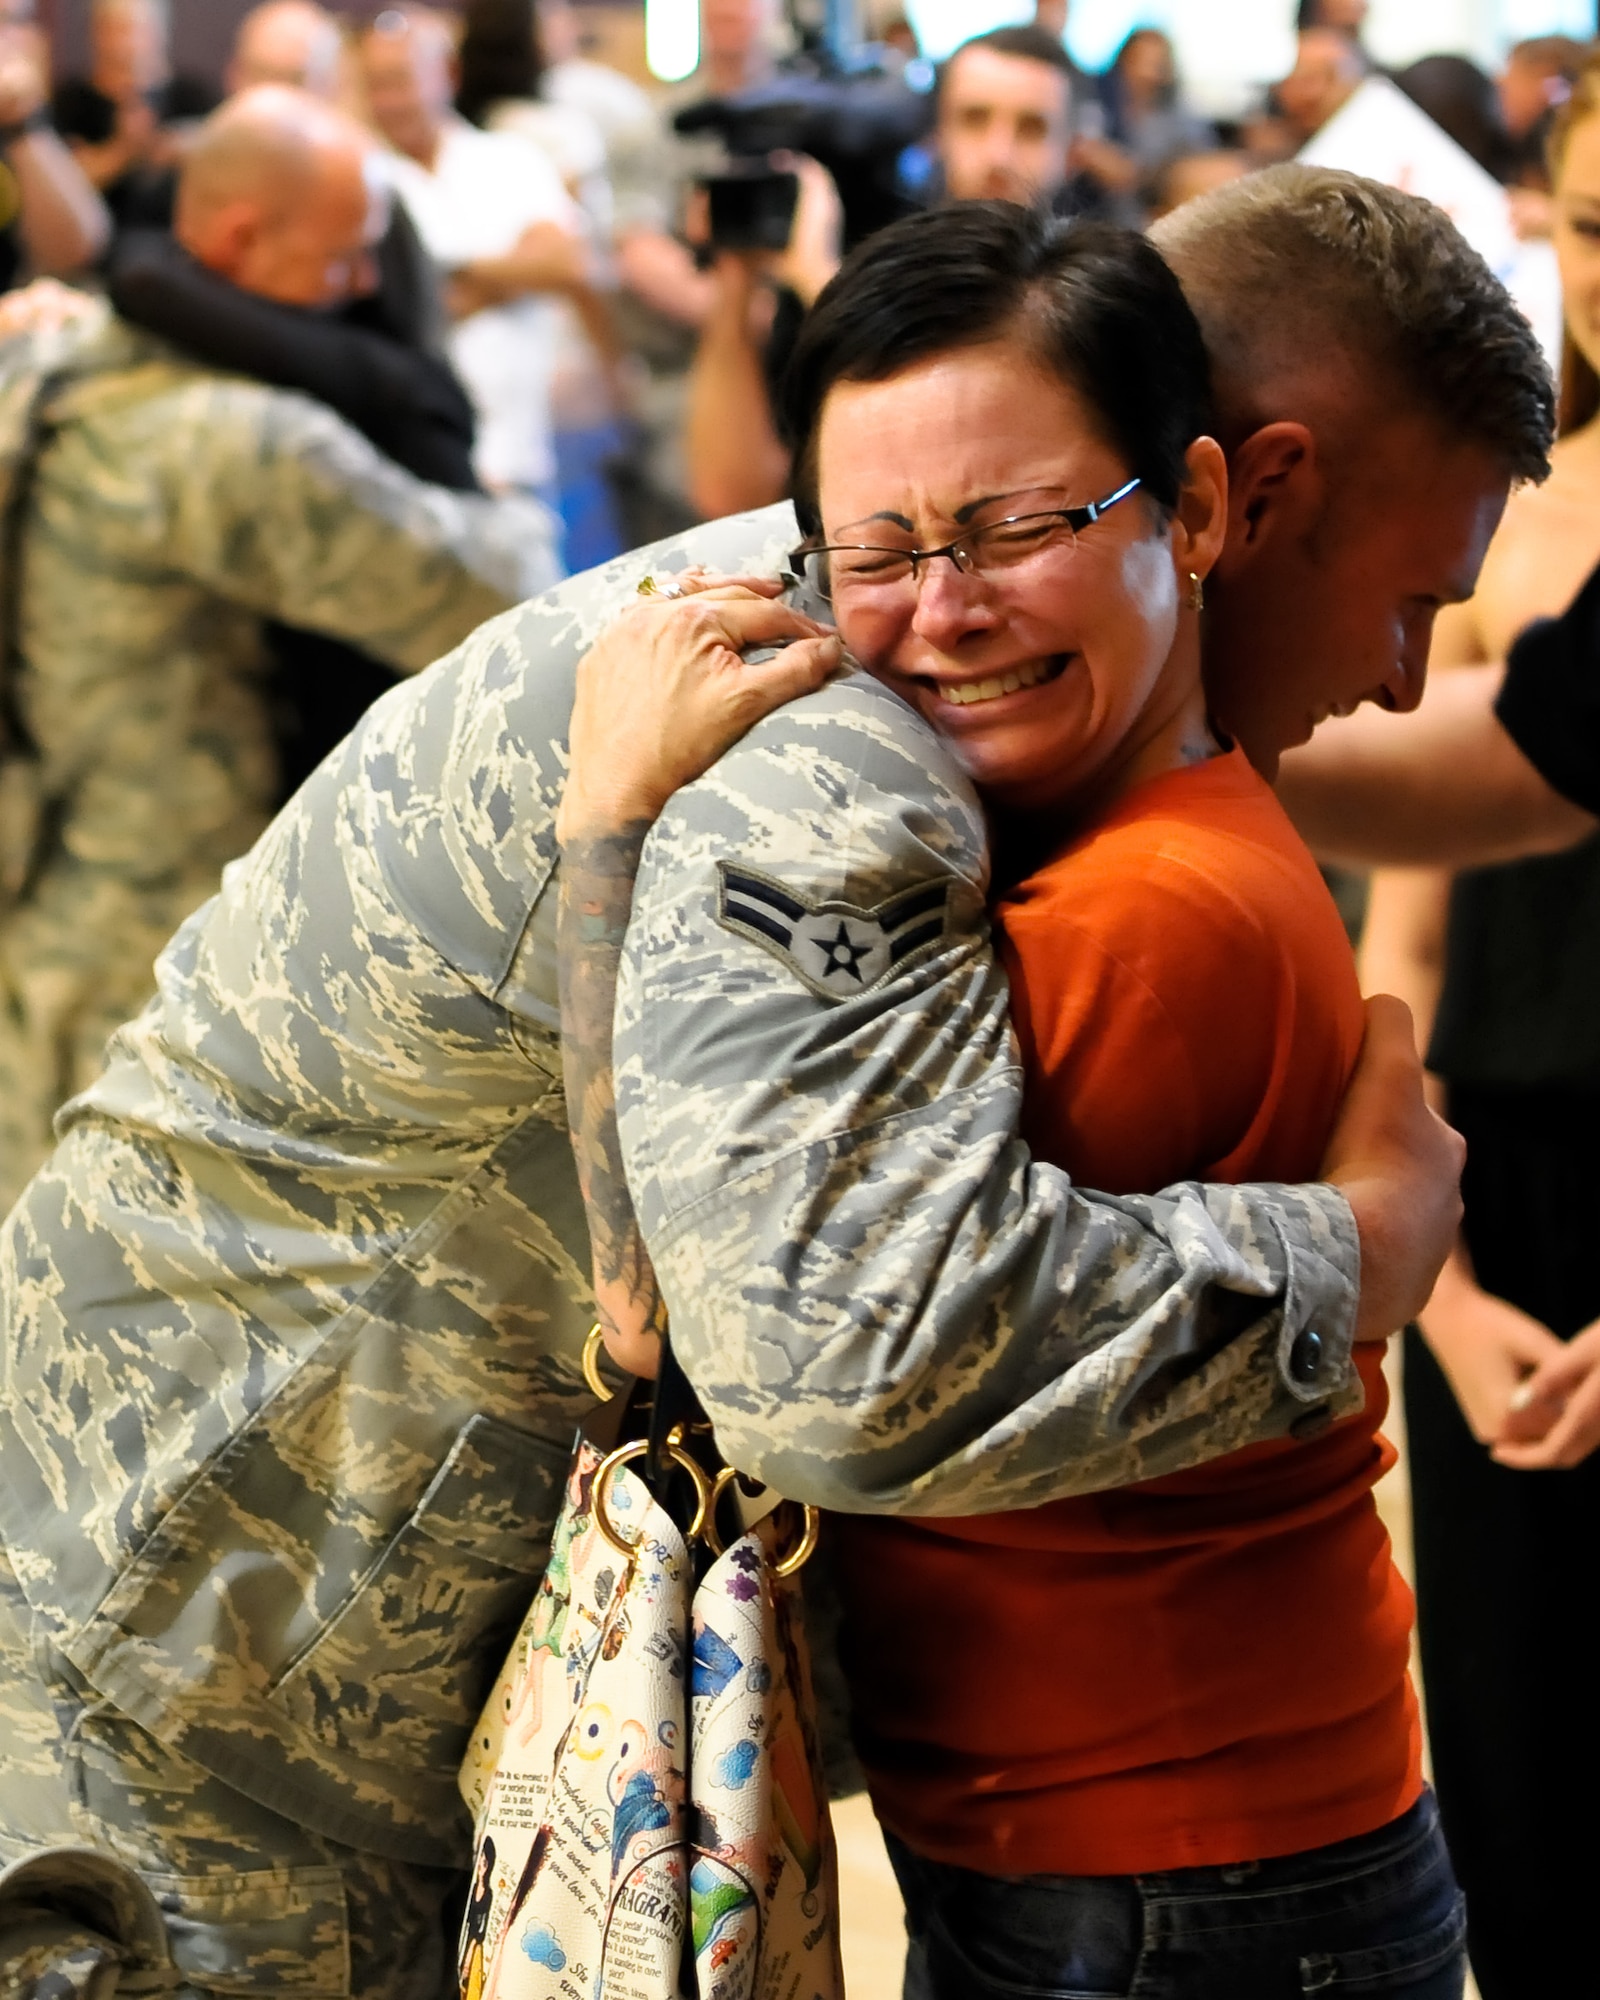 U.S. Air Force Senior Airman Jordan A.D. Sanford, security forces journeyman with the 182nd Security Forces Squadron, reunites with family and friends after arriving home at the General Wayne A. Downing Peoria International Airport in Peoria, Ill., Aug. 6, 2014. He and 17 Illinois Air National Guardsmen deployed to Southwest Asia for seven months in support of Operation Enduring Freedom. They were assigned to the 405th Expeditionary Security Forces Squadron overseas, where they were responsible for law enforcement and security missions in the region’s global war on terror. (U.S. Air National Guard photo by Staff Sgt. Lealan Buehrer/Released)